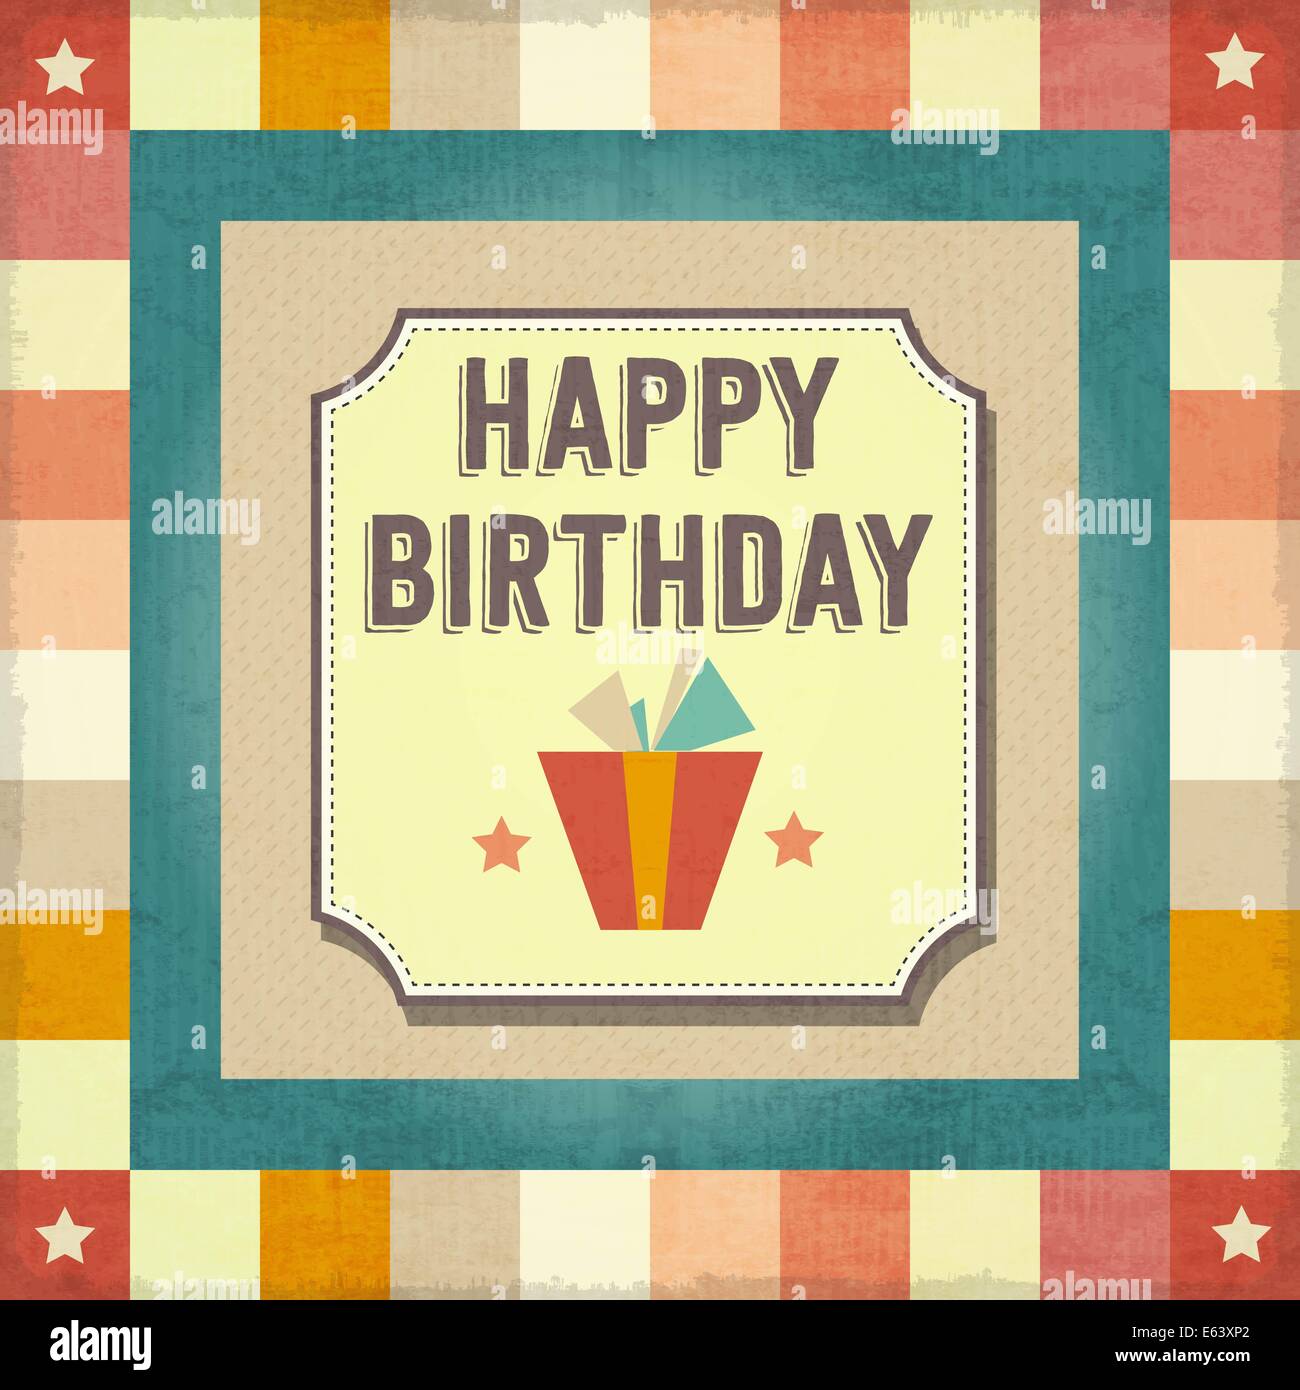 Vintage Birthday Card High Resolution Stock Photography and Images - Alamy